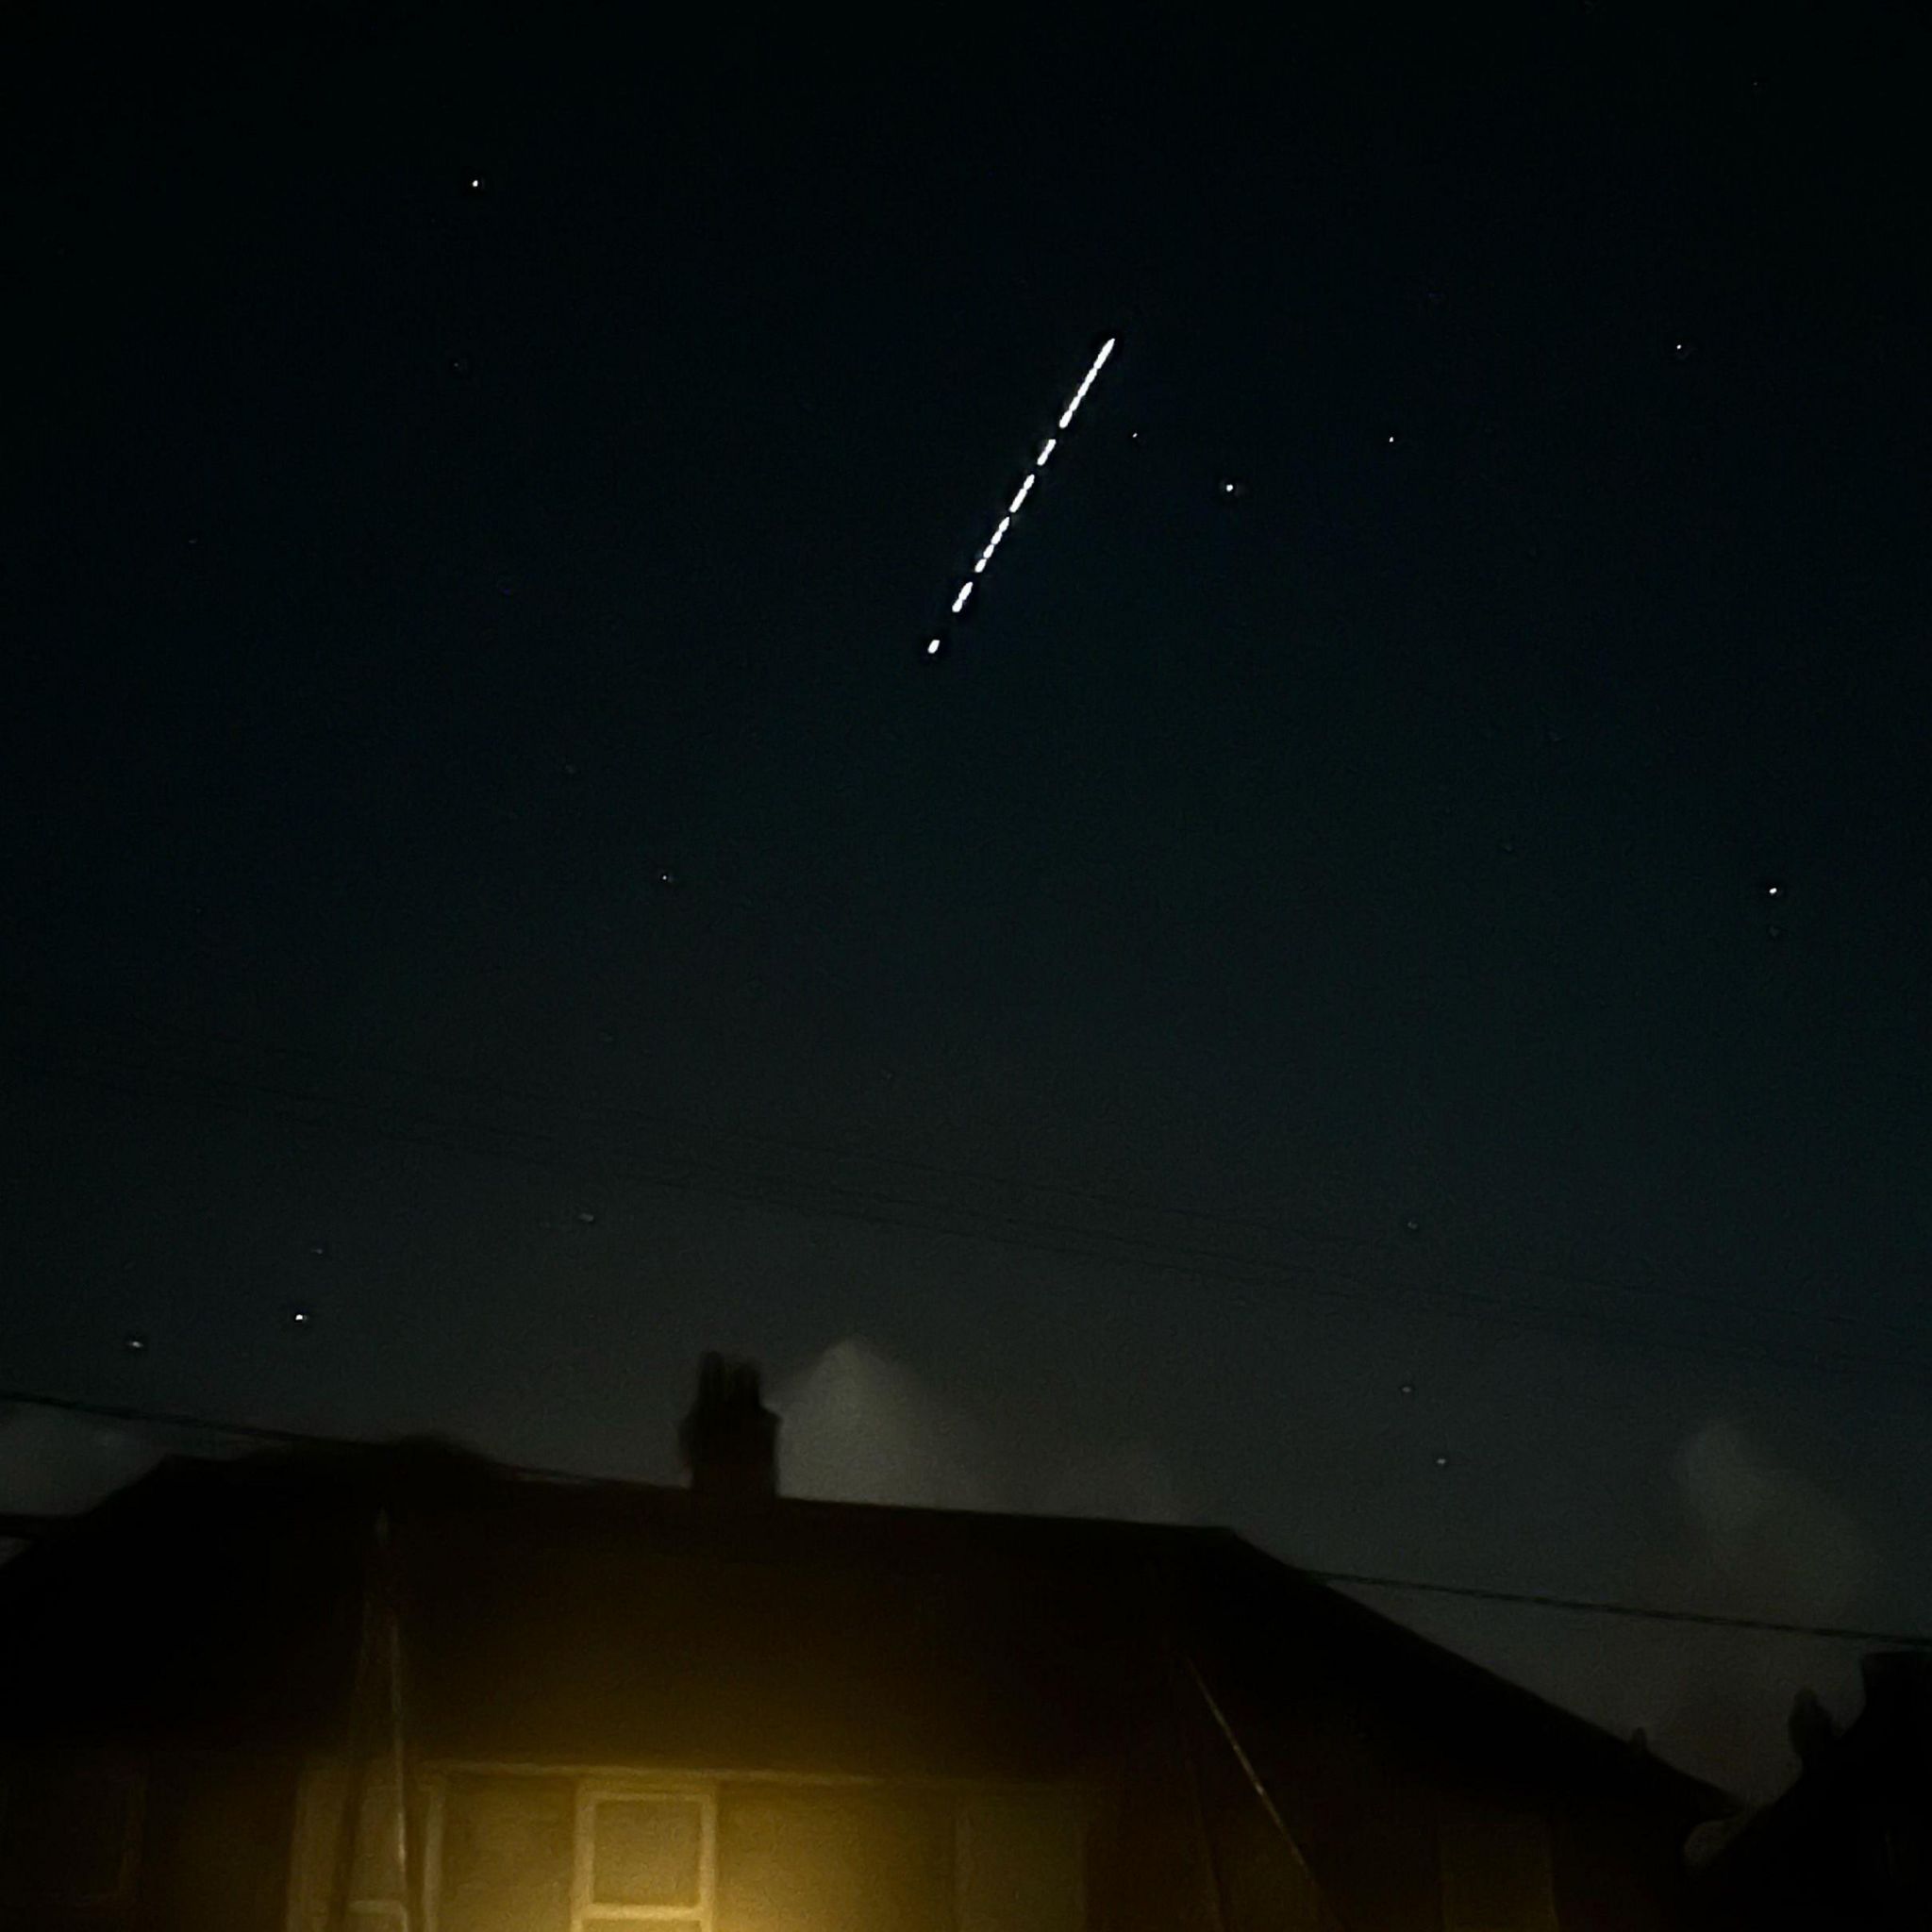 Starlink satellites seen in the sky across Godshill, Isle of Wight